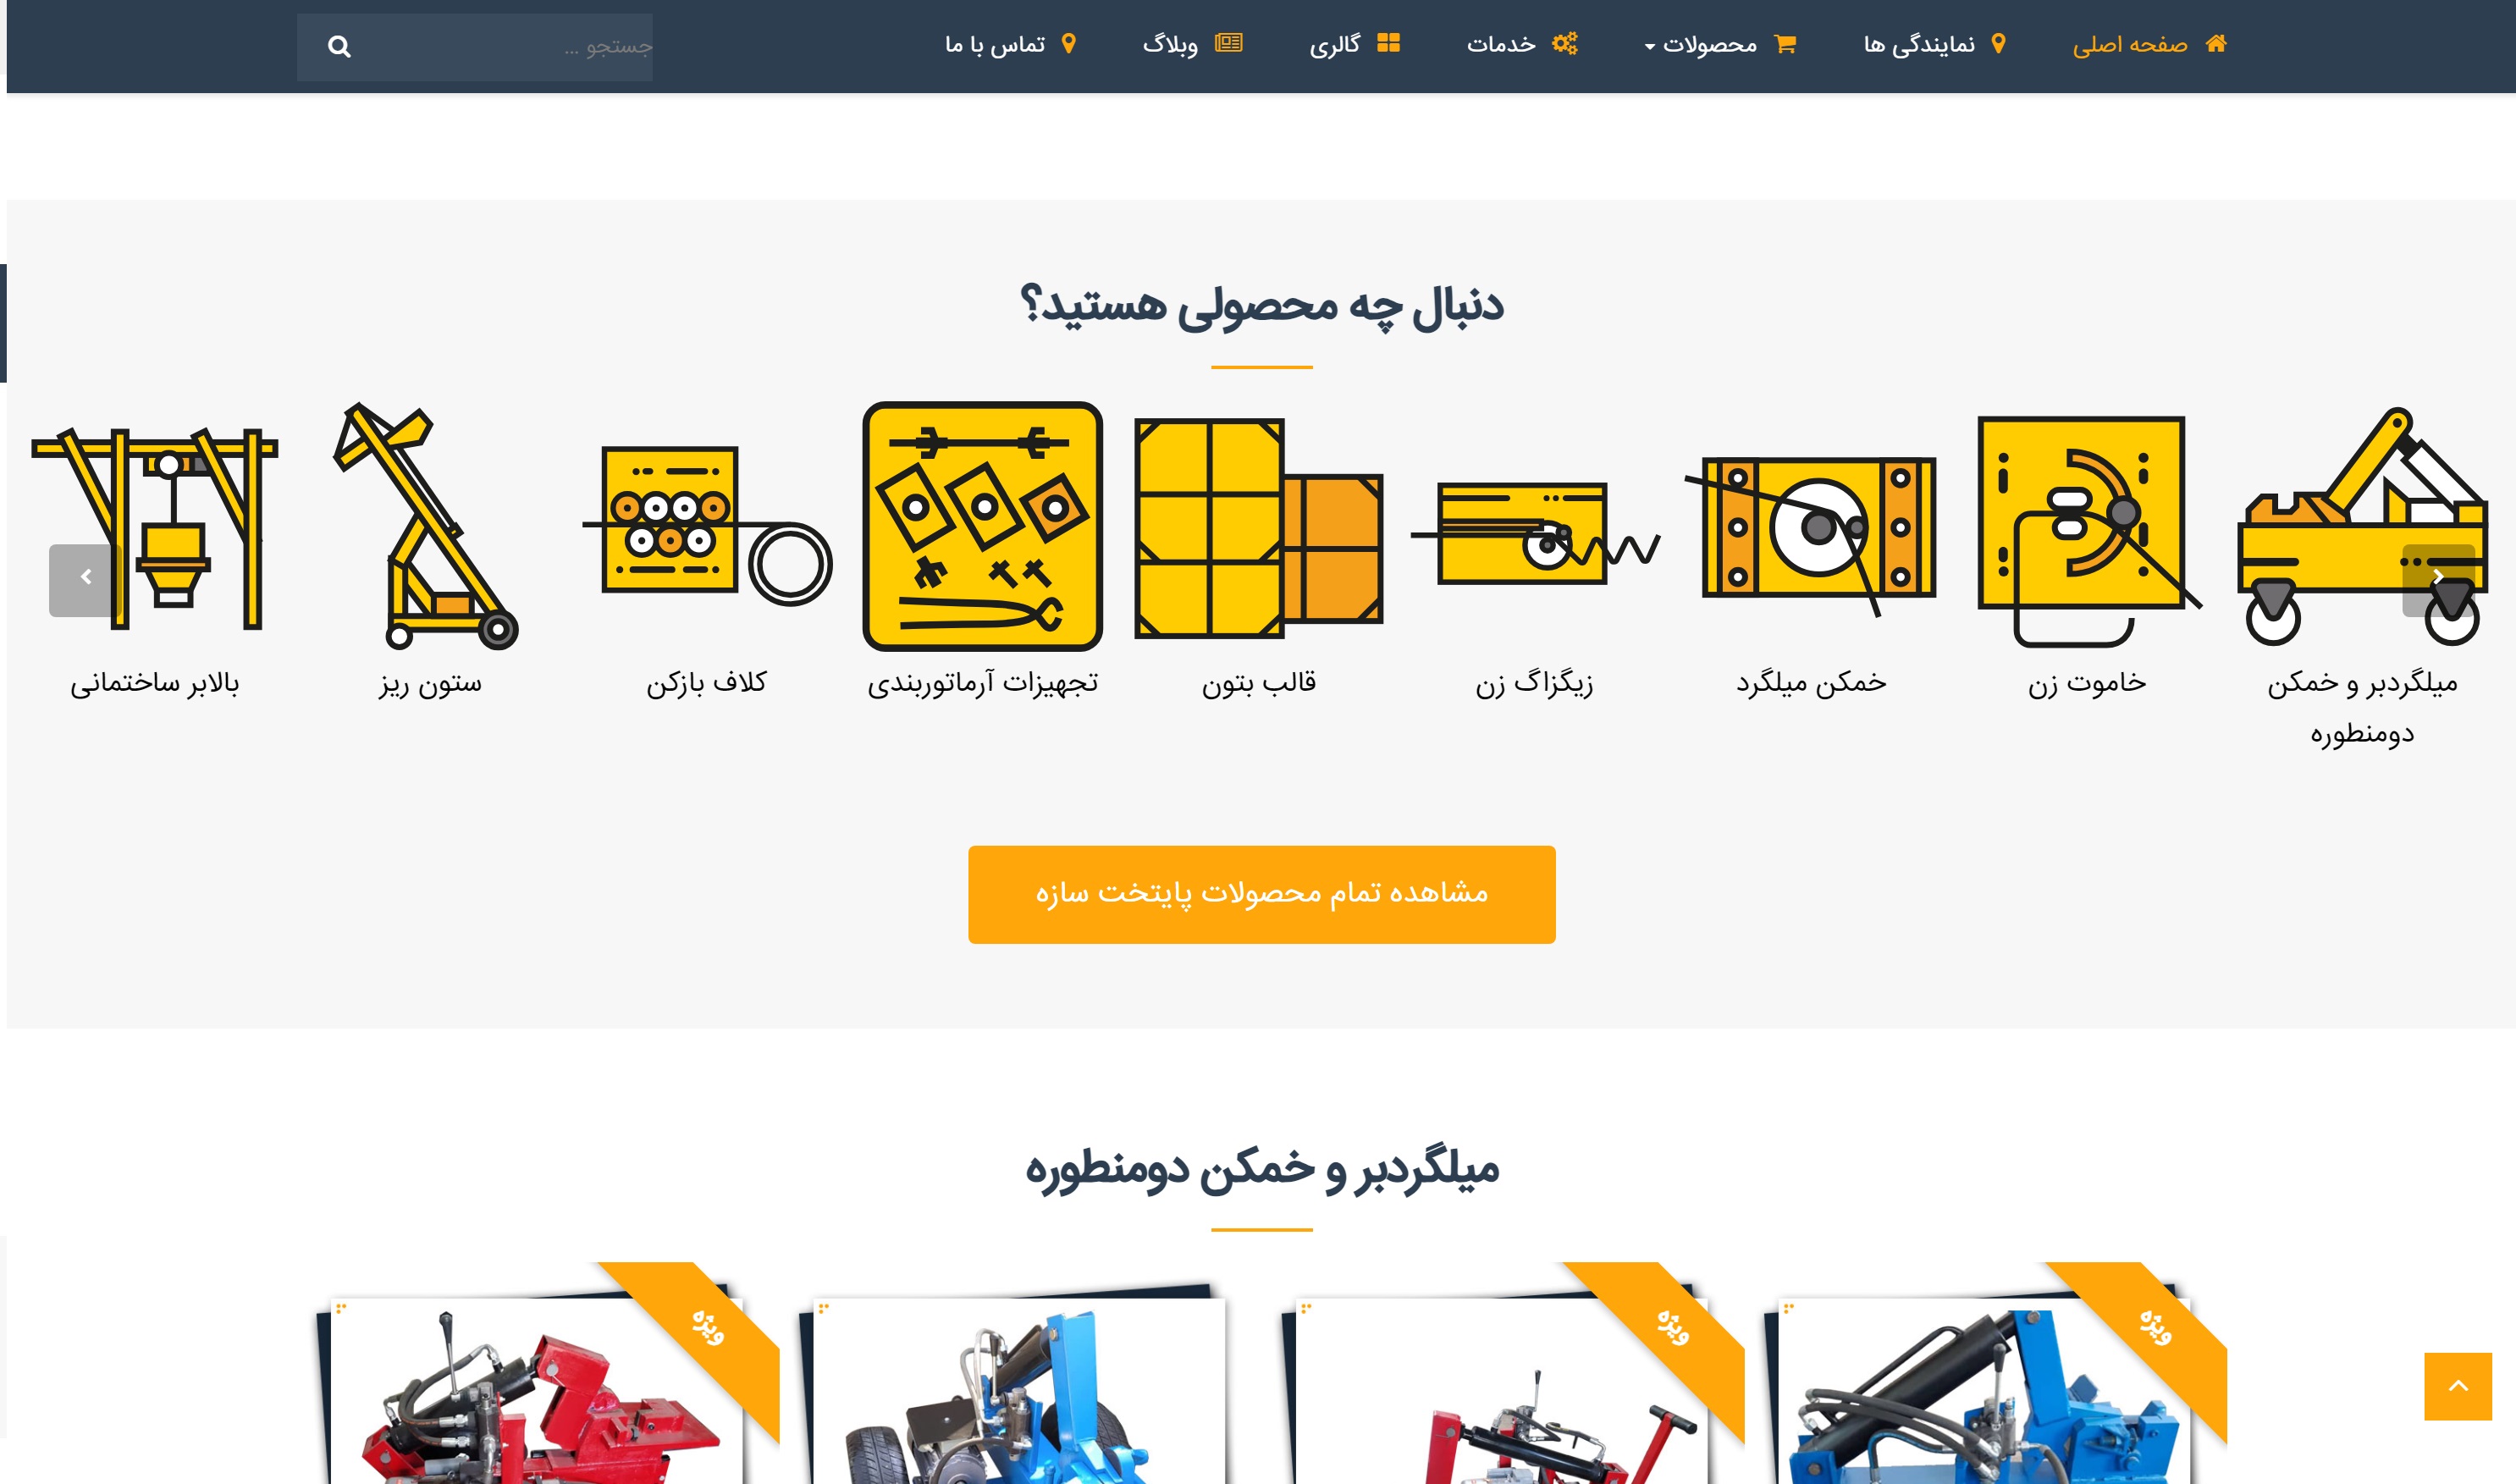 Shahinsoft.ir Paytakht Sazeh The quick access to products in Paytakht Sazeh